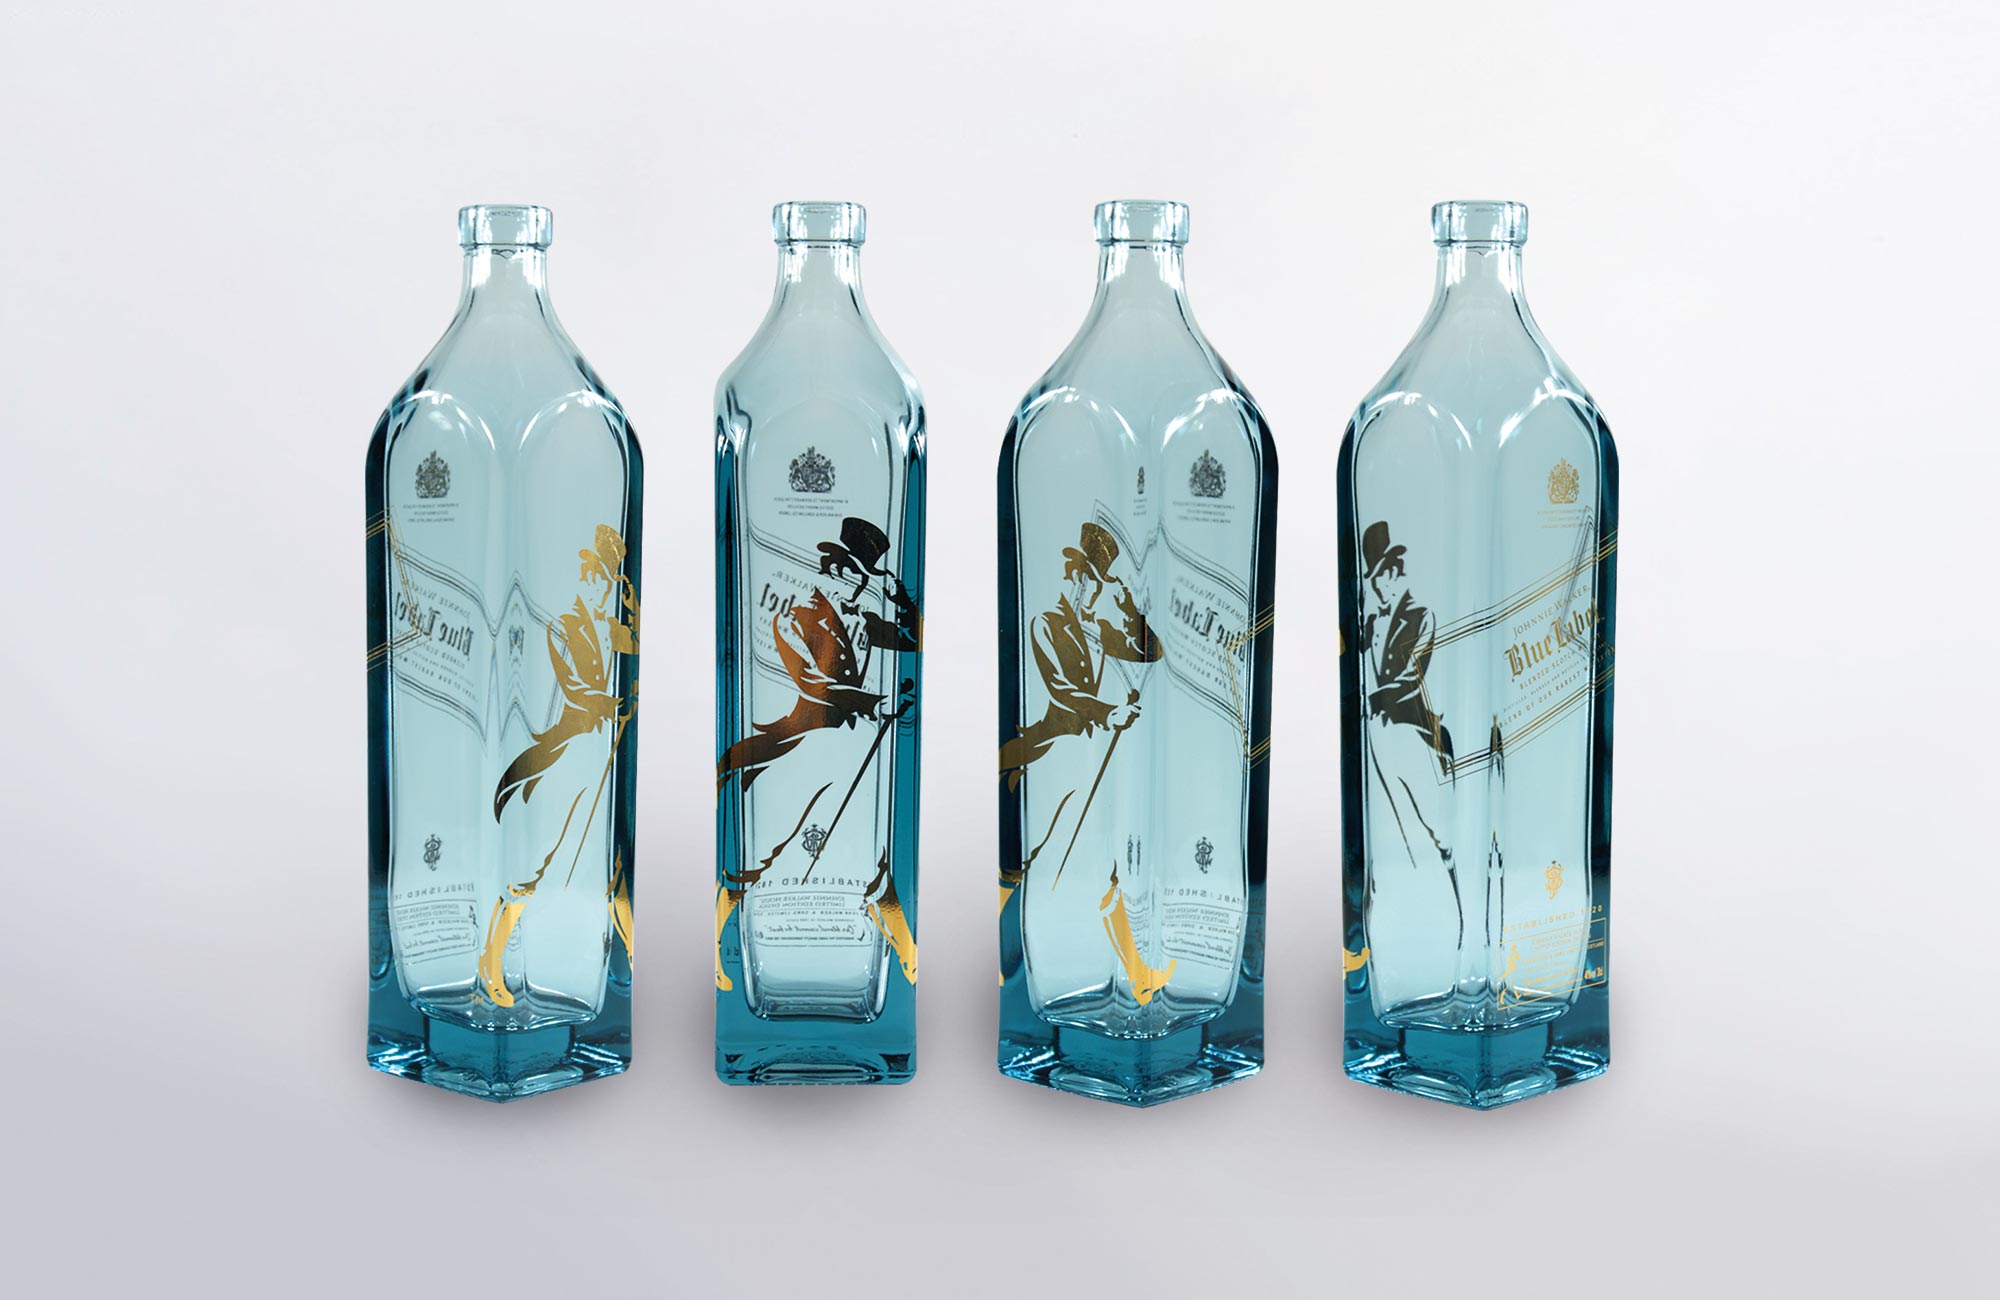 Square bottles decorated across all edges via screen printing.